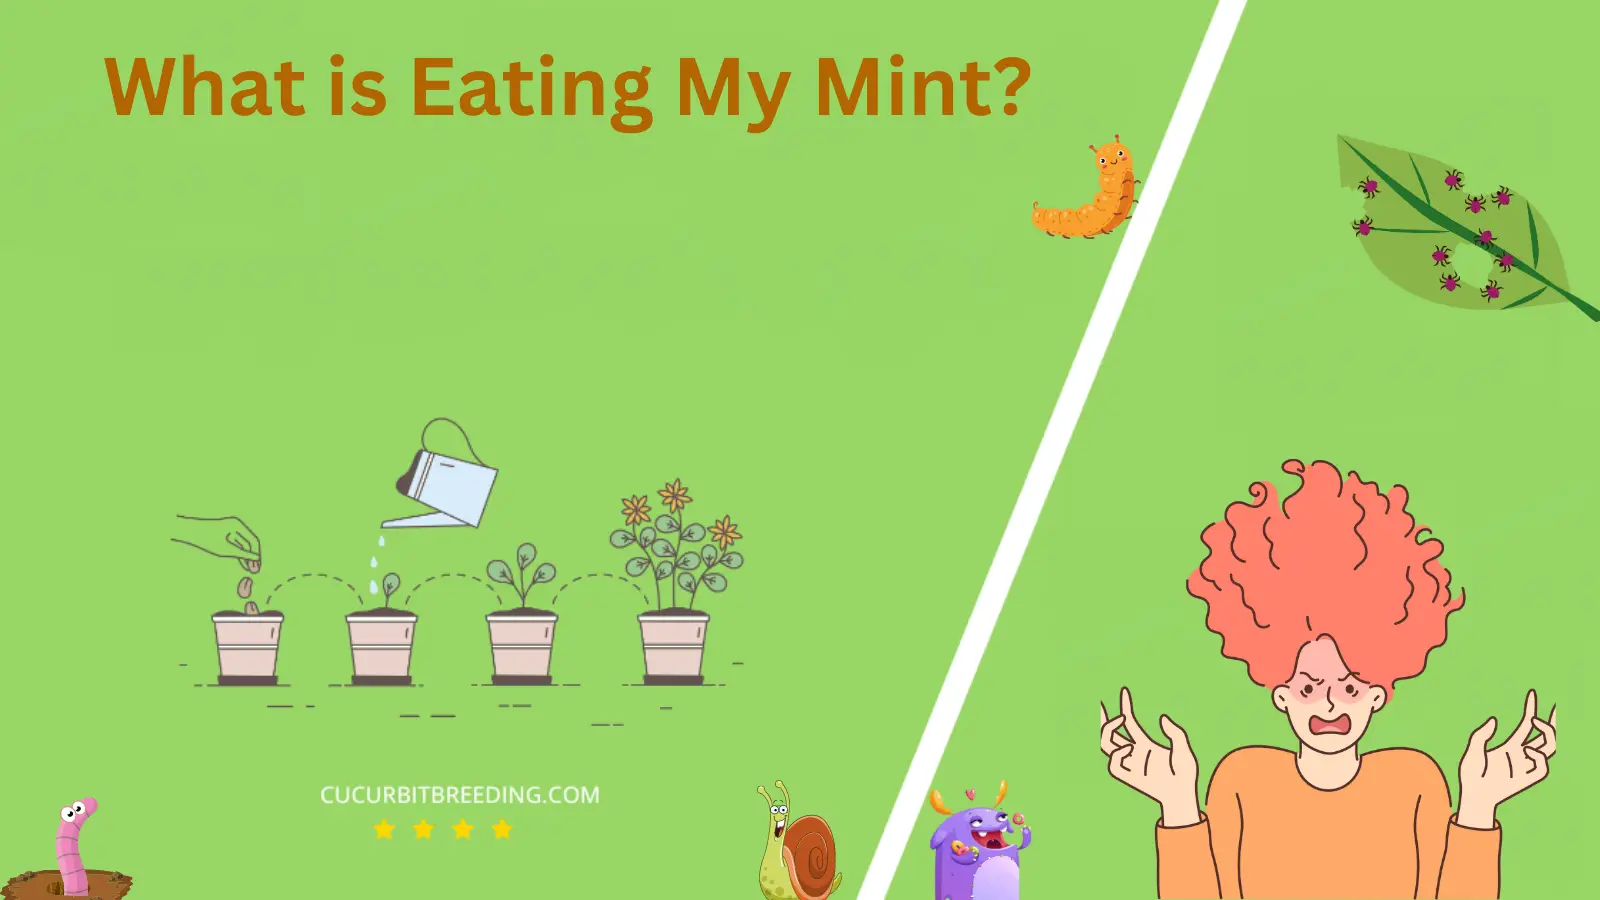 What is Eating My Mint